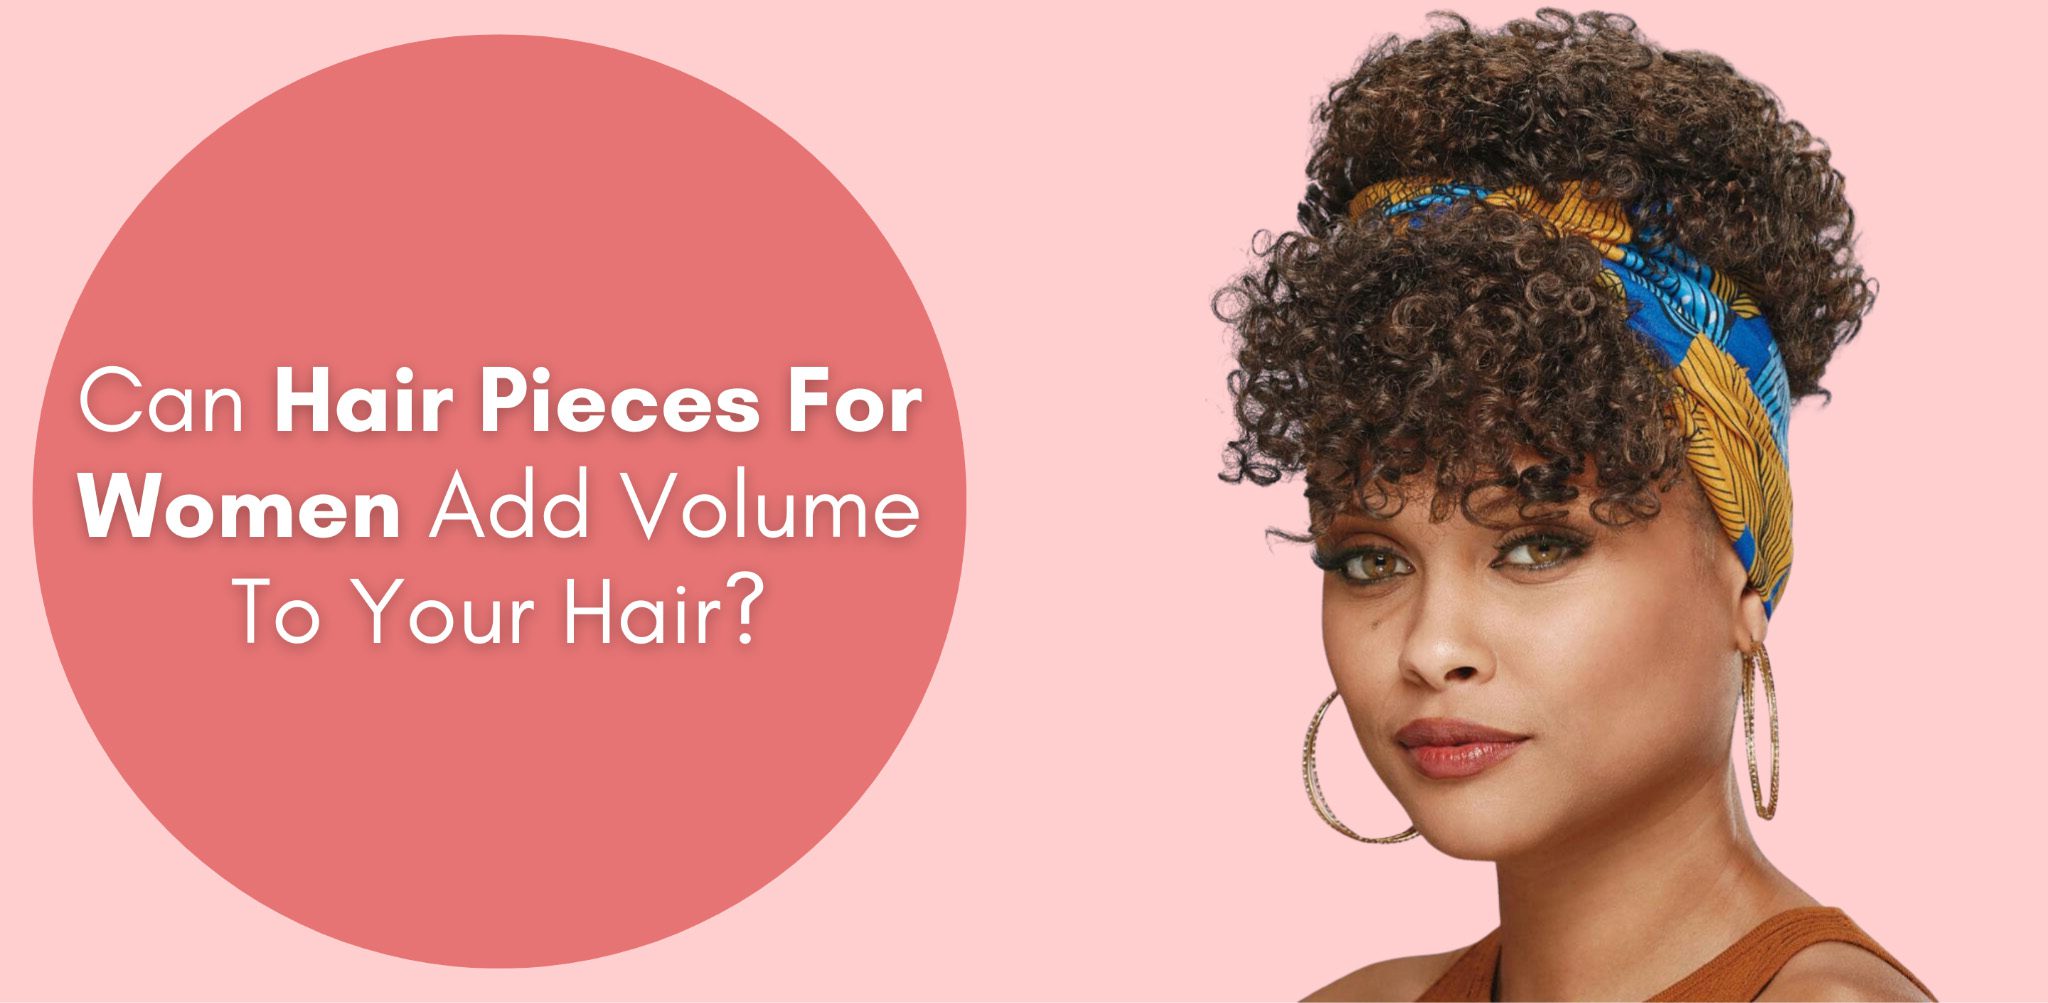 Can Hair Pieces For Women Add Volume To Your Hair?